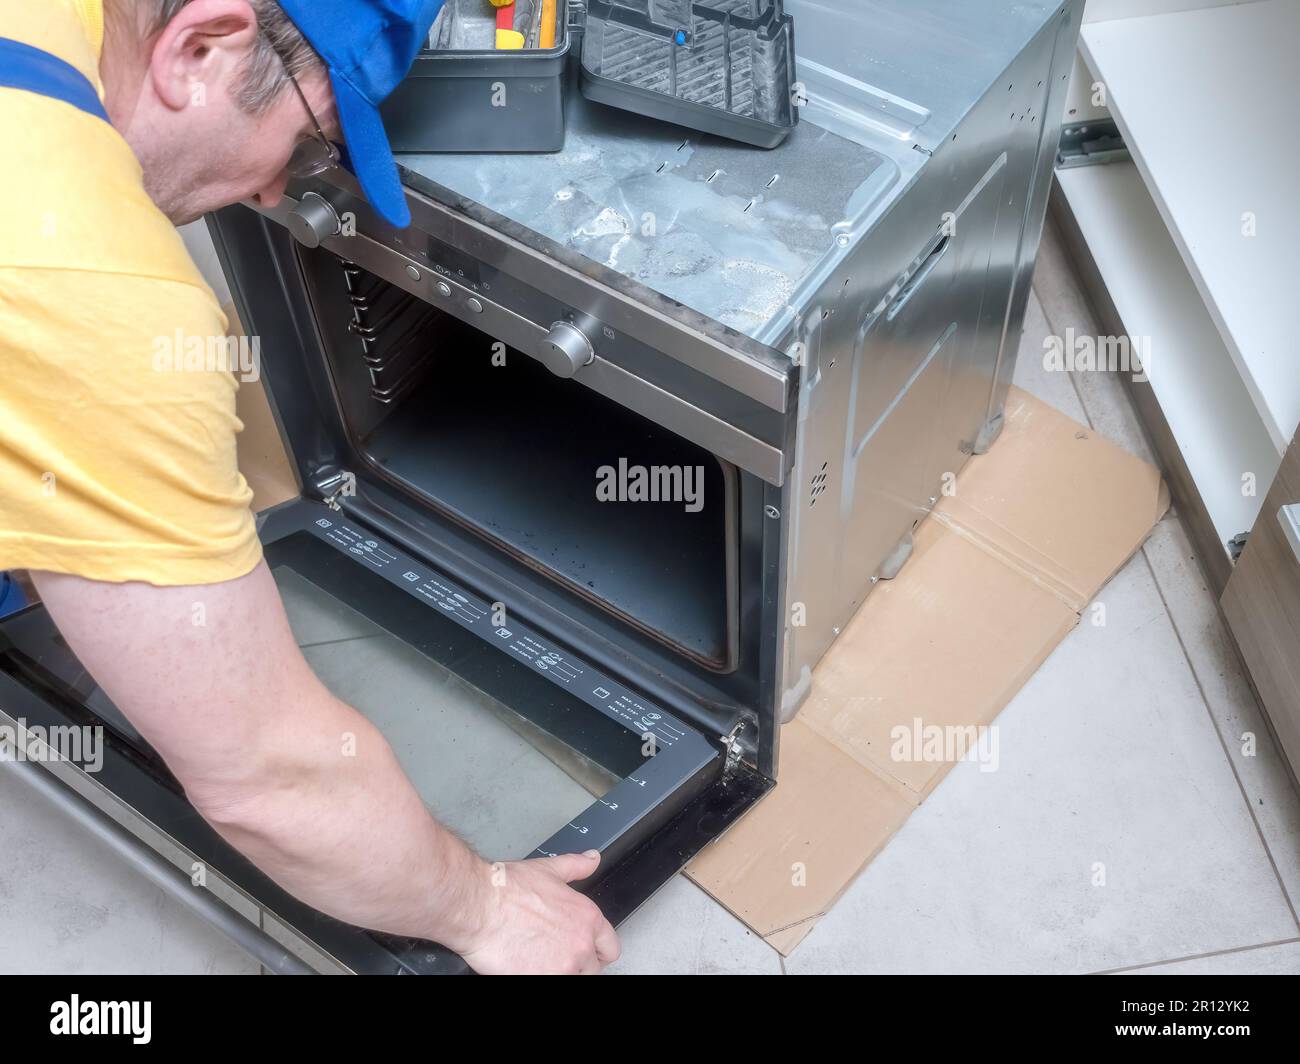 Serviceman removing electric oven door for easy repair access Stock Photo